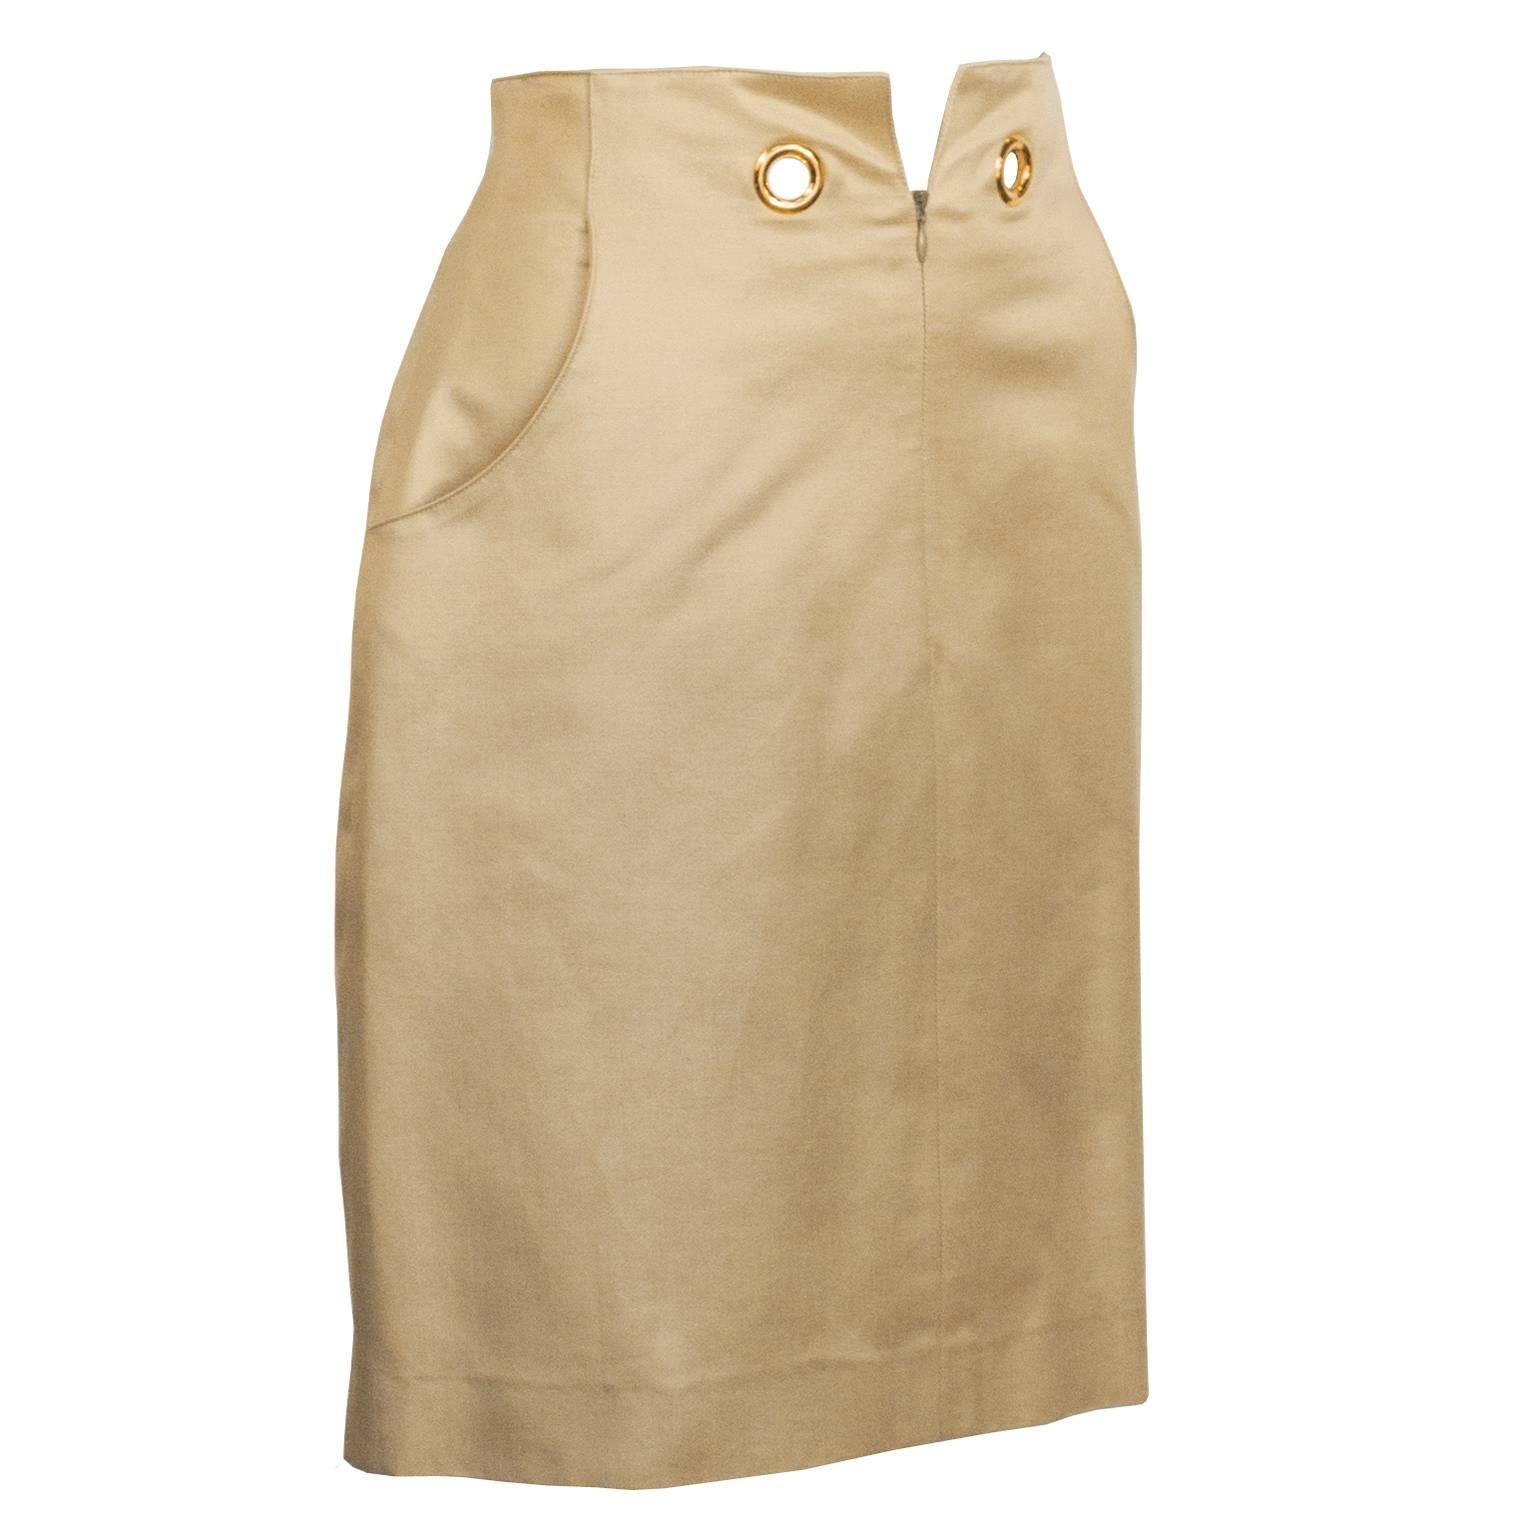 Chic 1990's Hermes beige cotton gabardine straight cut skirt featuring two gold grommets, two slit pockets, and a front zip closure. Fully lined in beige silk. Excellent vintage condition. Best accessory for this piece is an Hermes twilly tied